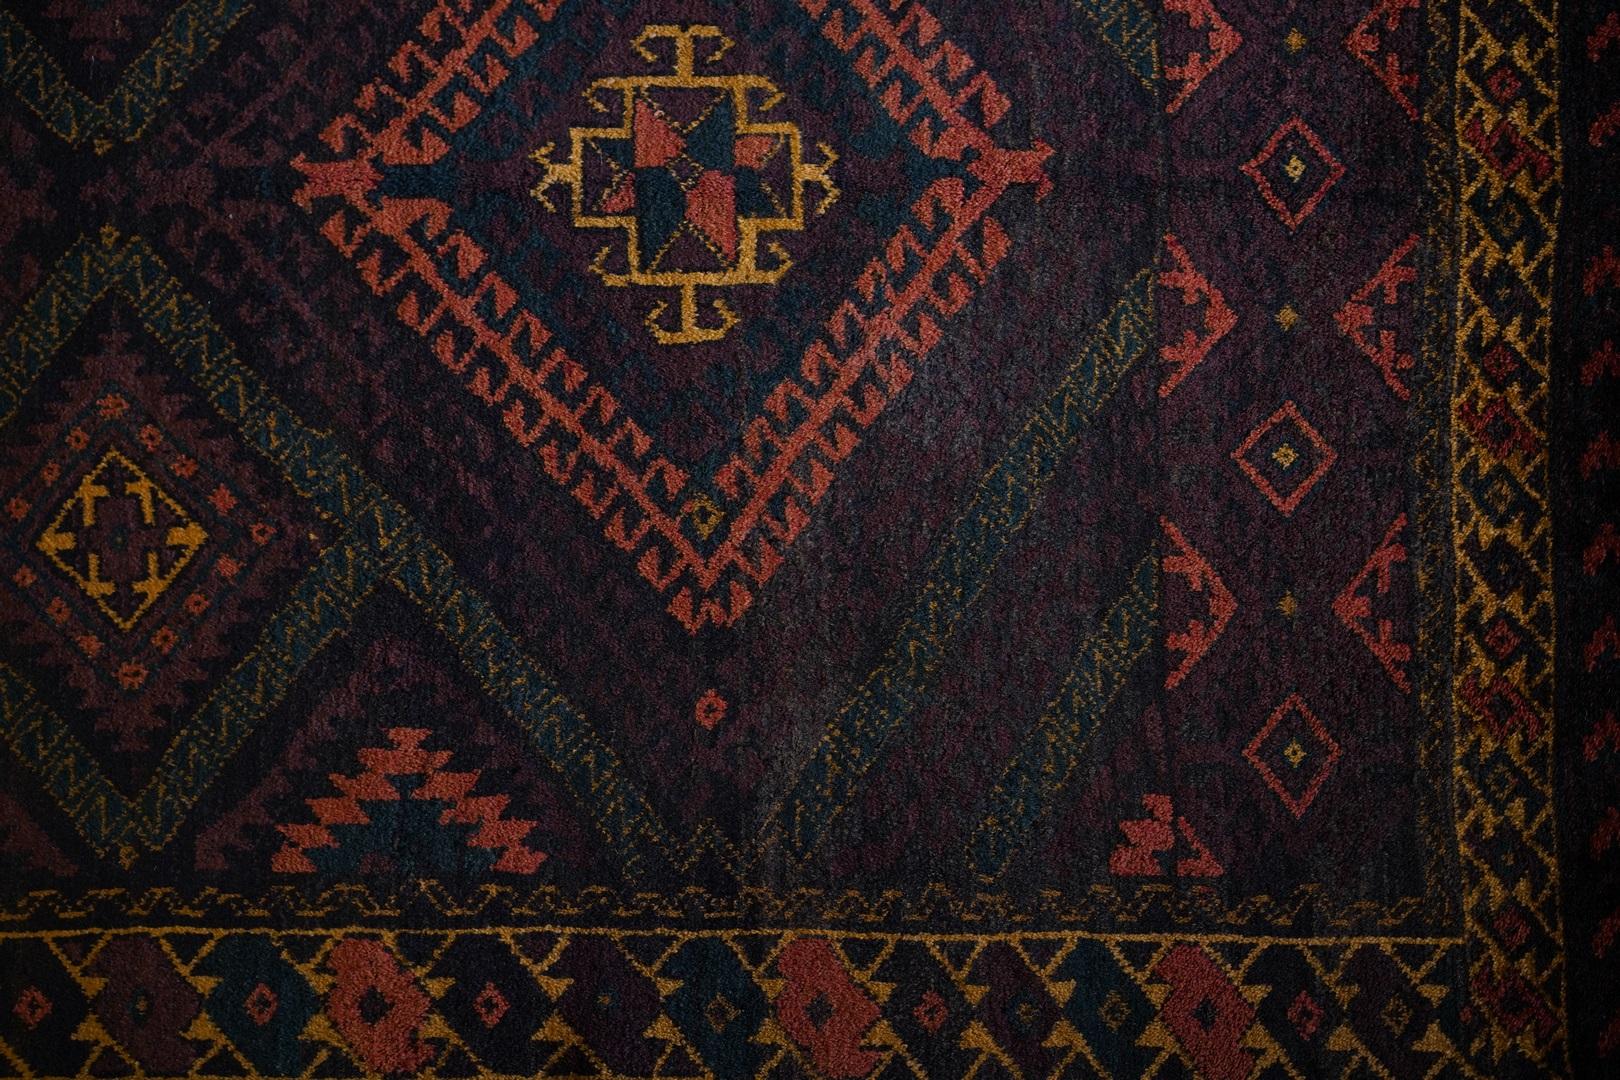 For a special and exclusive launch on 1st Dibs, we have assembled some superior mid-20th century (and older) fine Vintage/Semi-Antique pieces. These rugs from distant eastern and northern Persian provinces were woven by tribal women circa 1950 or